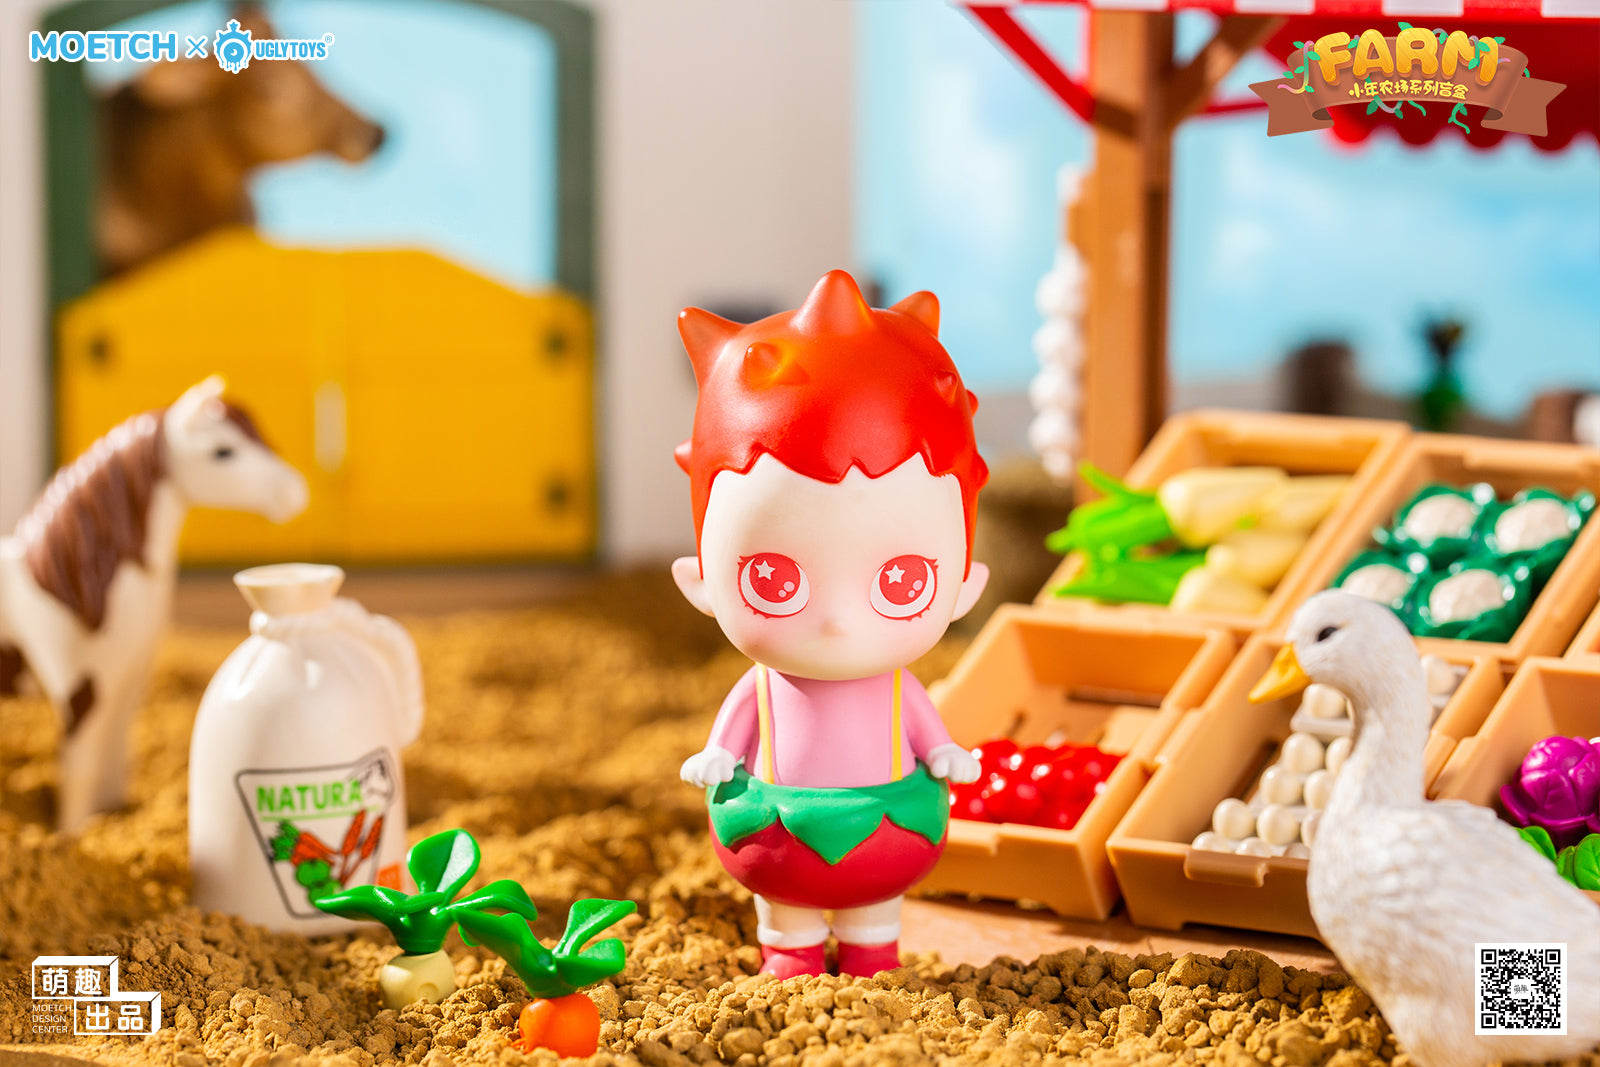 Xiao nian Blindbox Farm Series by Ugly Toys x Moetch